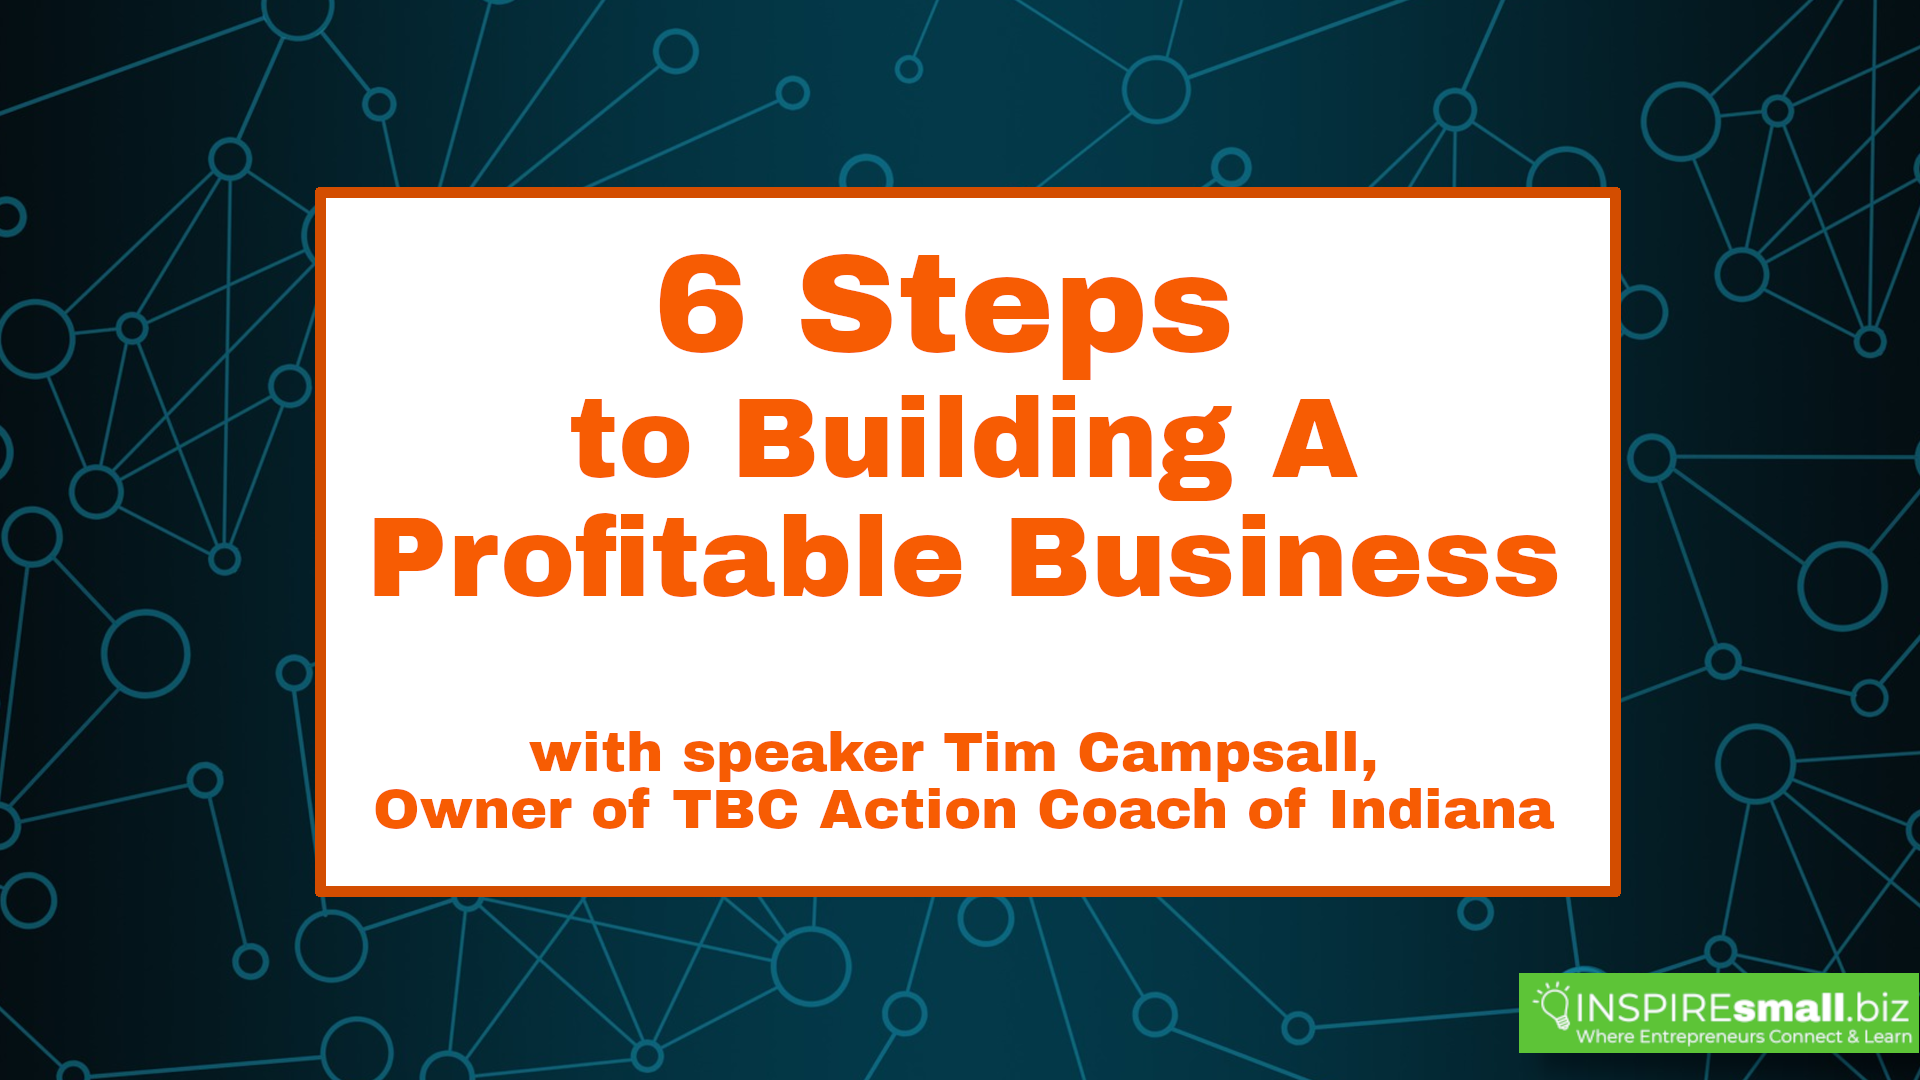 6 Steps to Building a Profitable Business with speaker Tim Campsall, owner of TBC Action Coach of Indiana, hosted by INSPIREsmall.biz